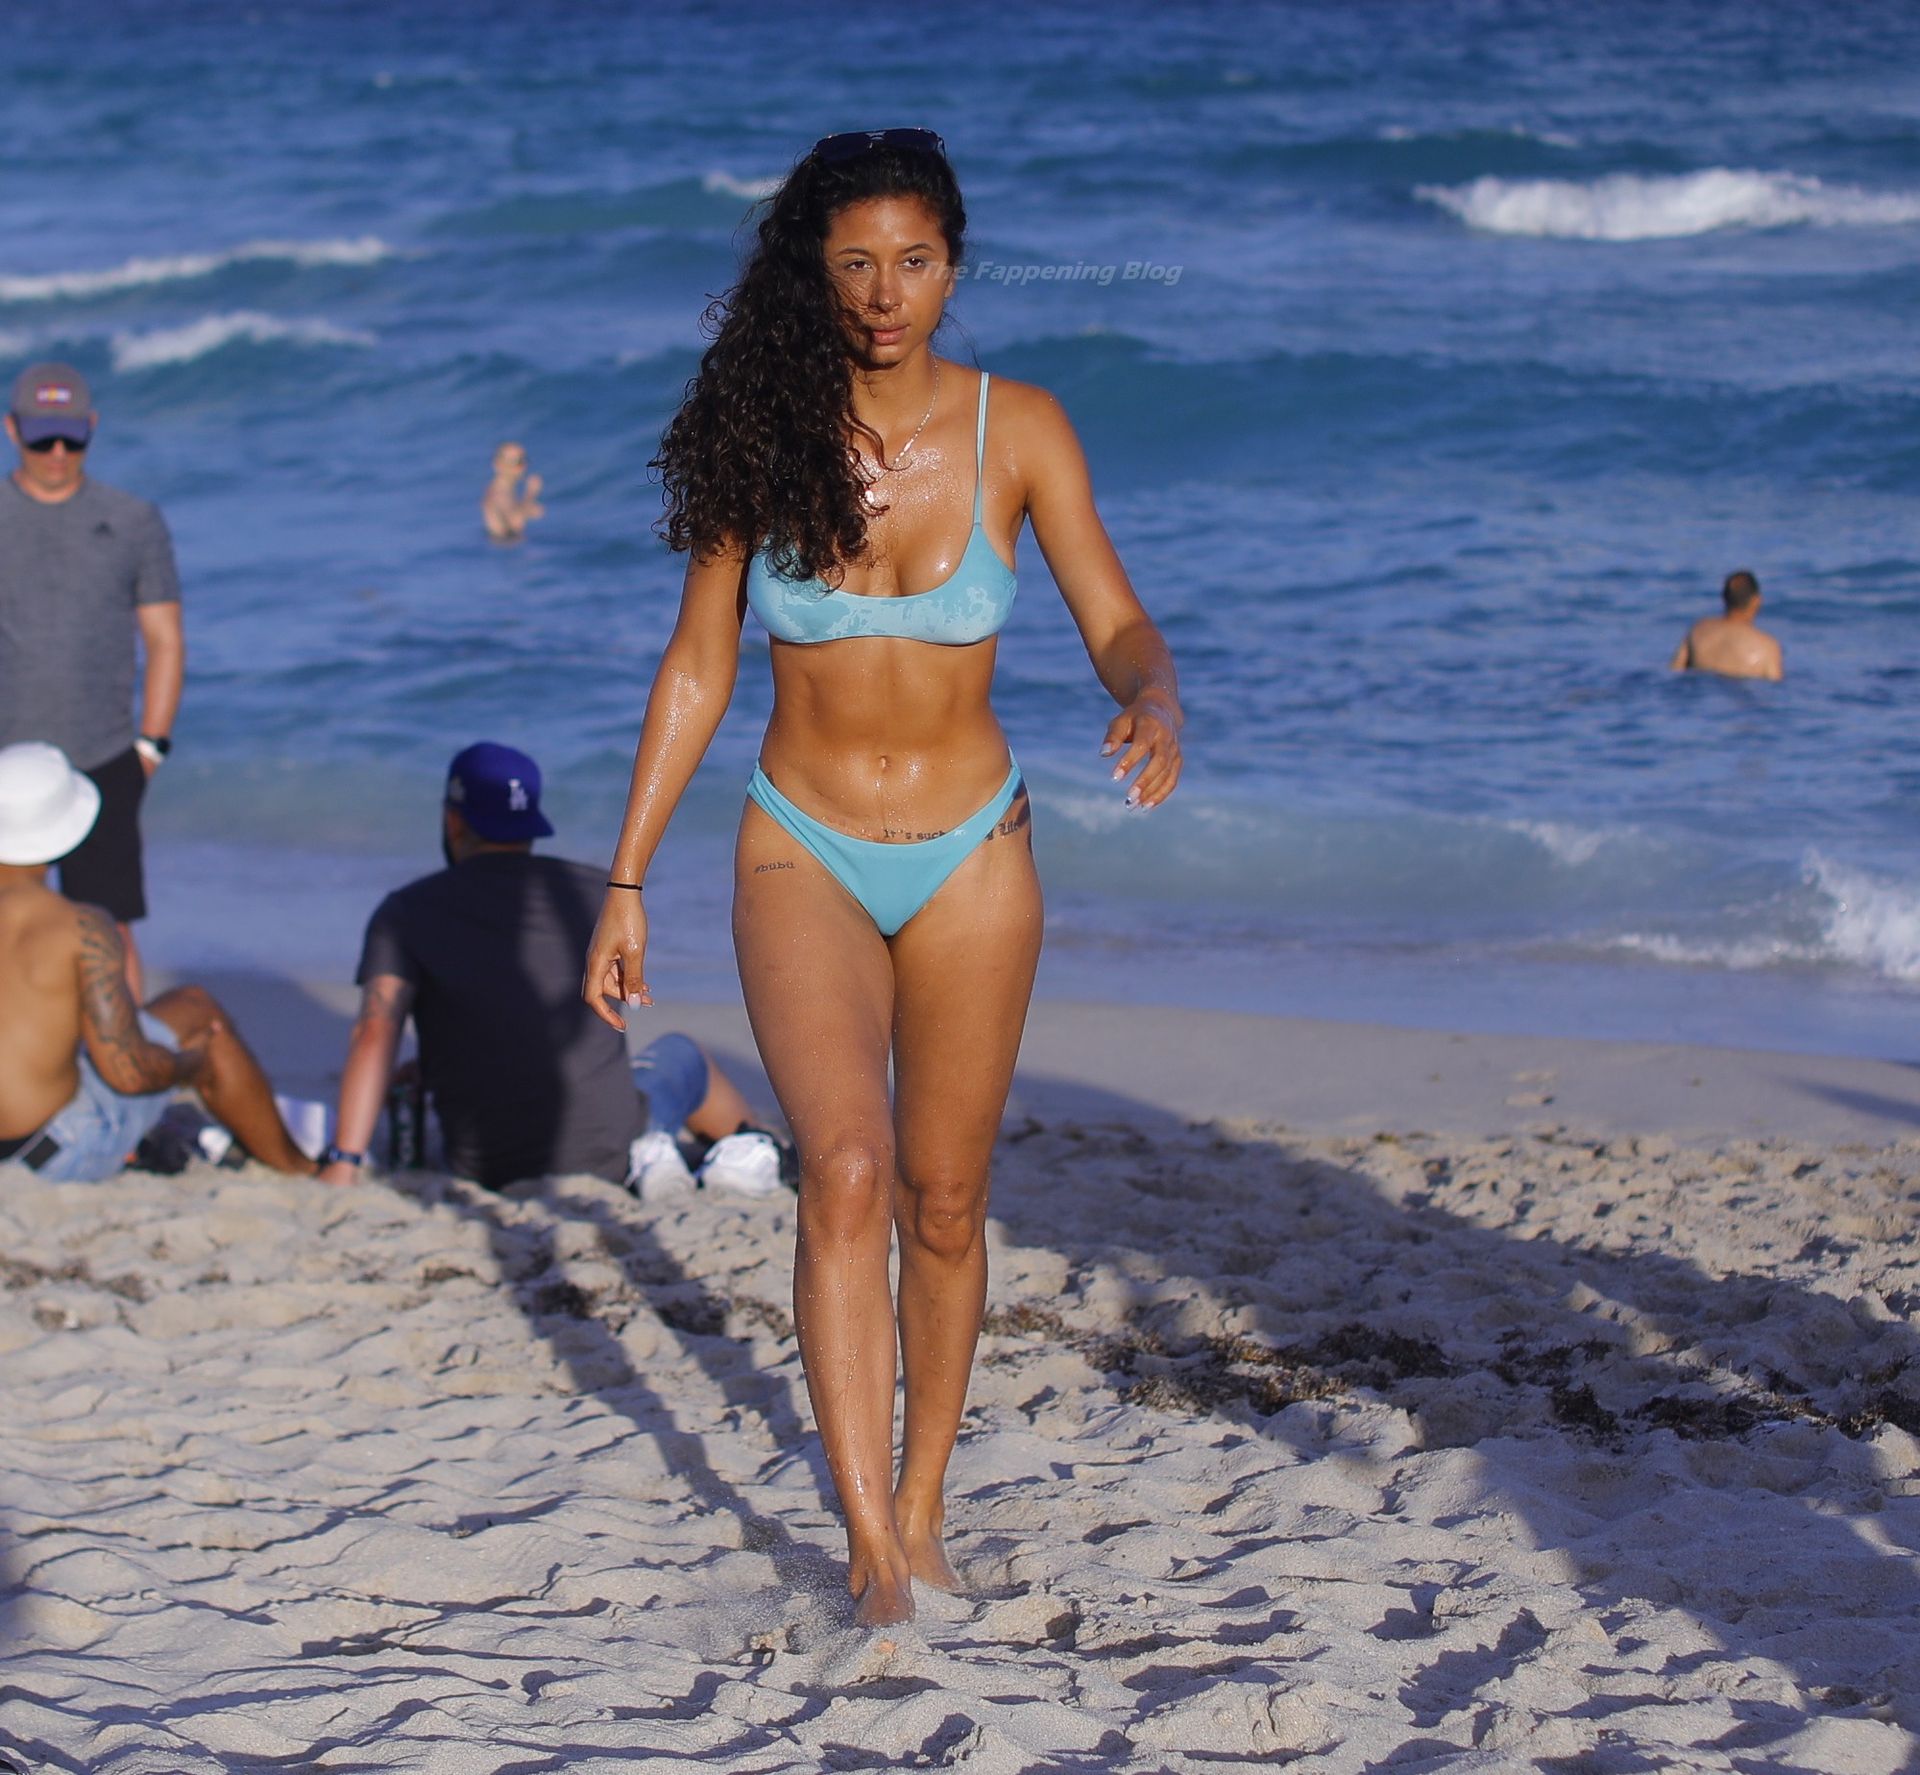 Becca Scott Shows Off Her Curves on the Beach in Miami (32 Phot
os)